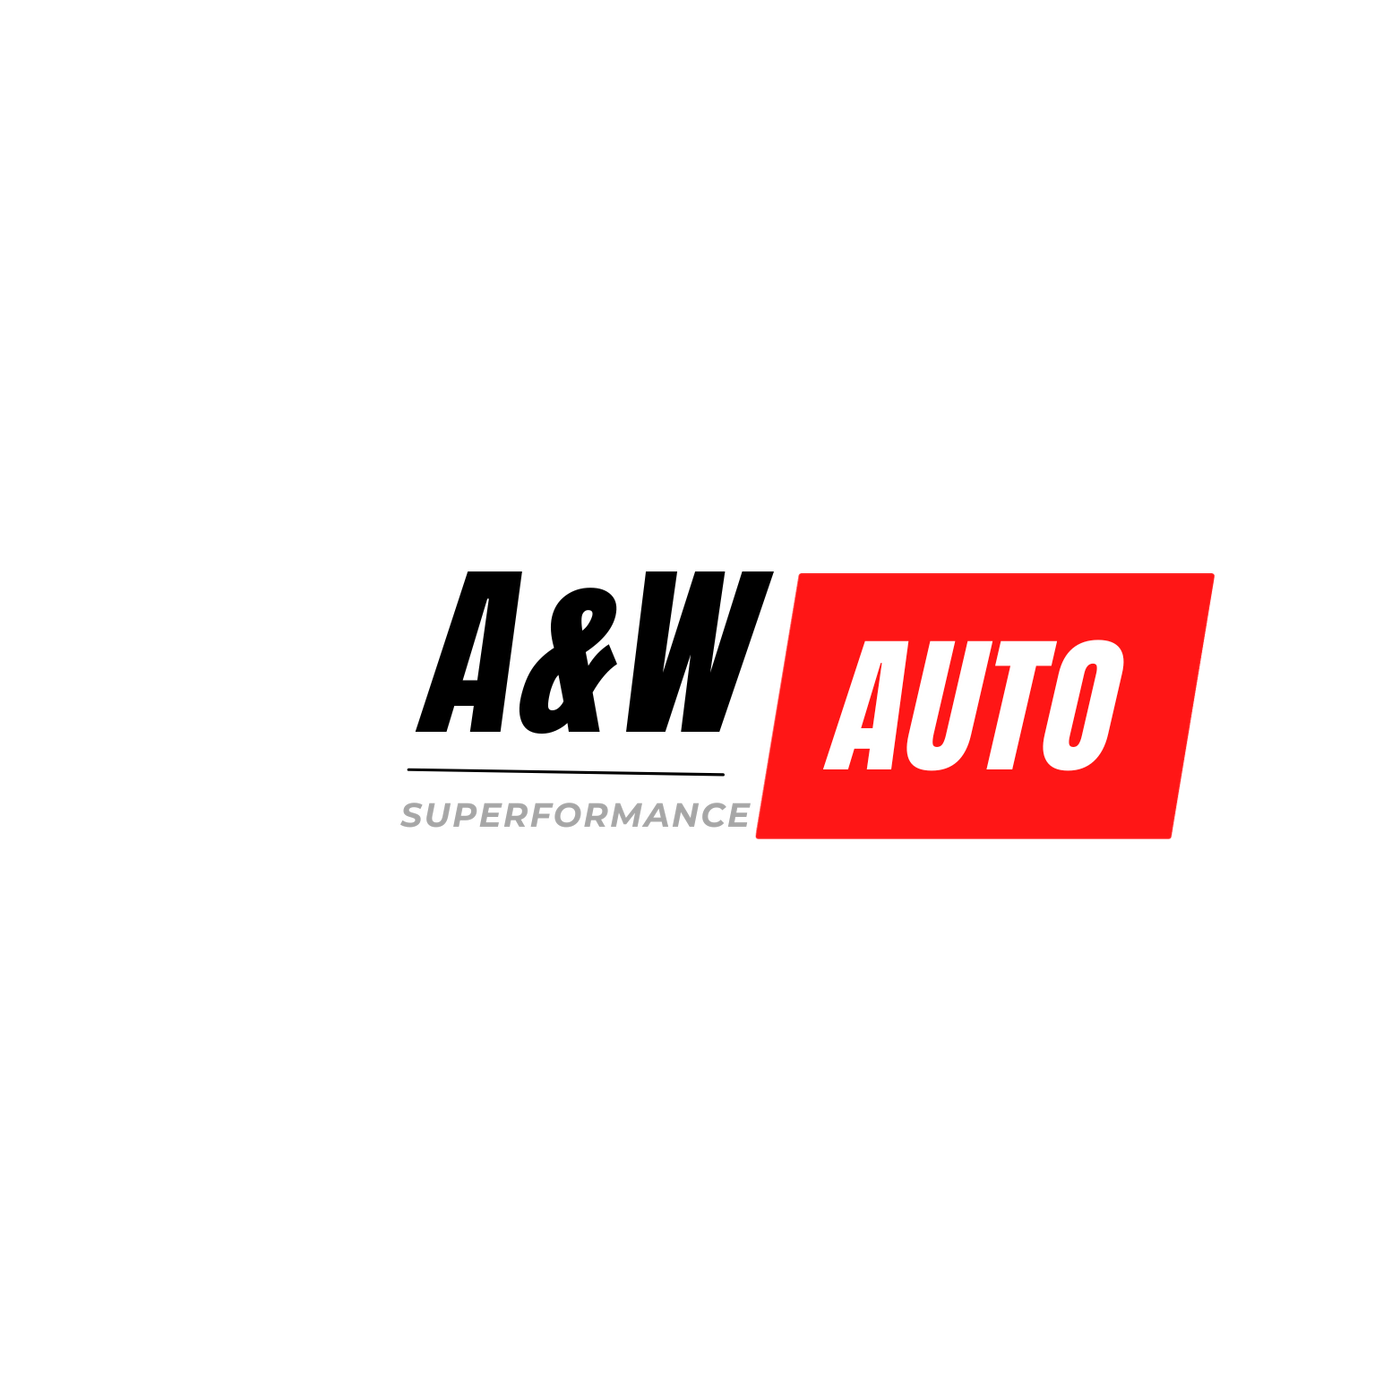 Top 5 Reasons to Choose AW Auto for Your Car Repair Needs